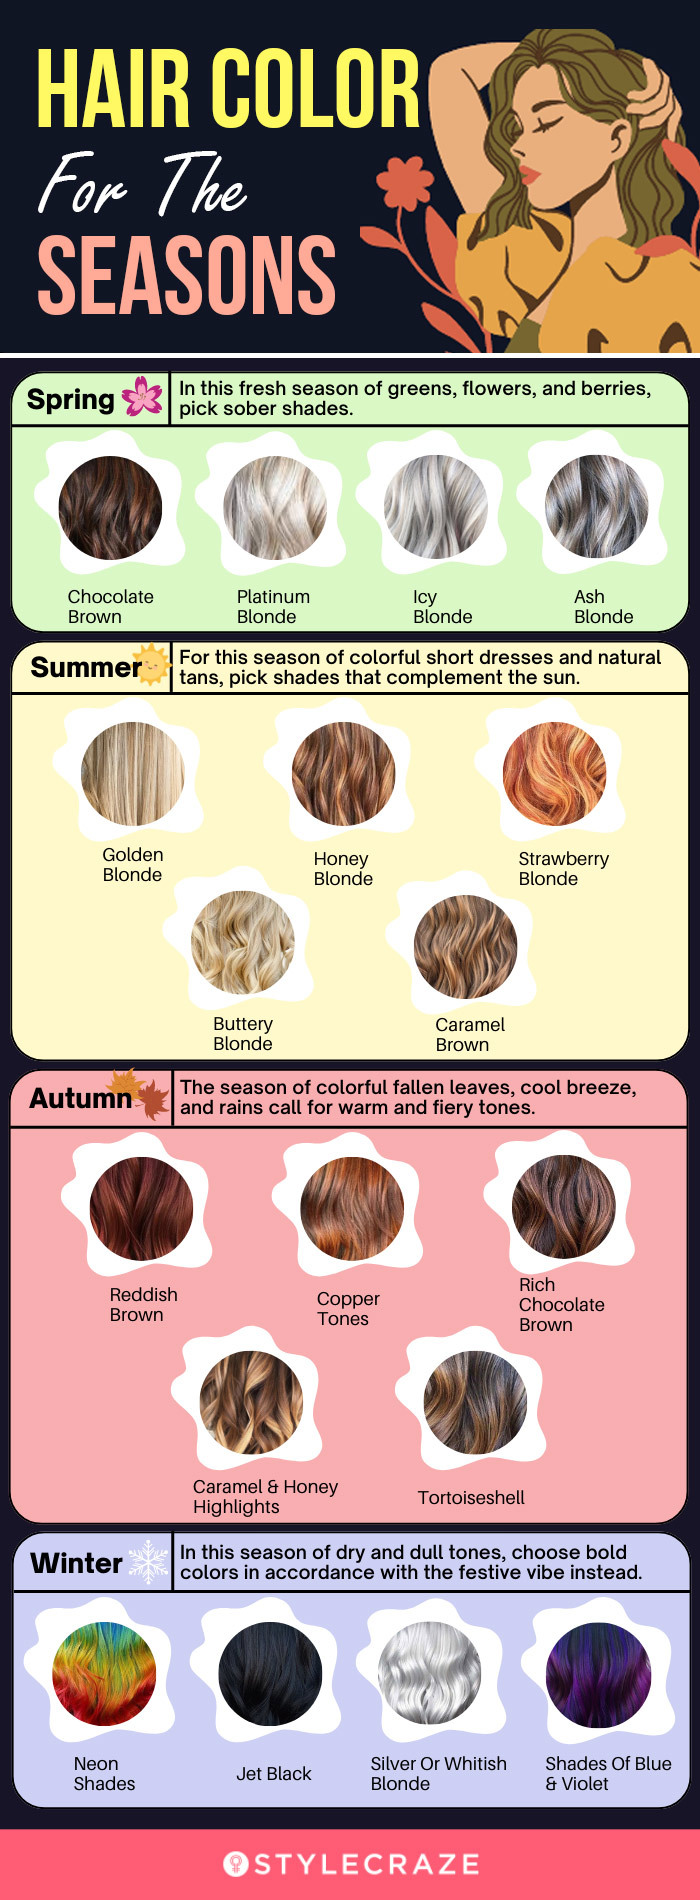 hair color for the seasons (infographic)